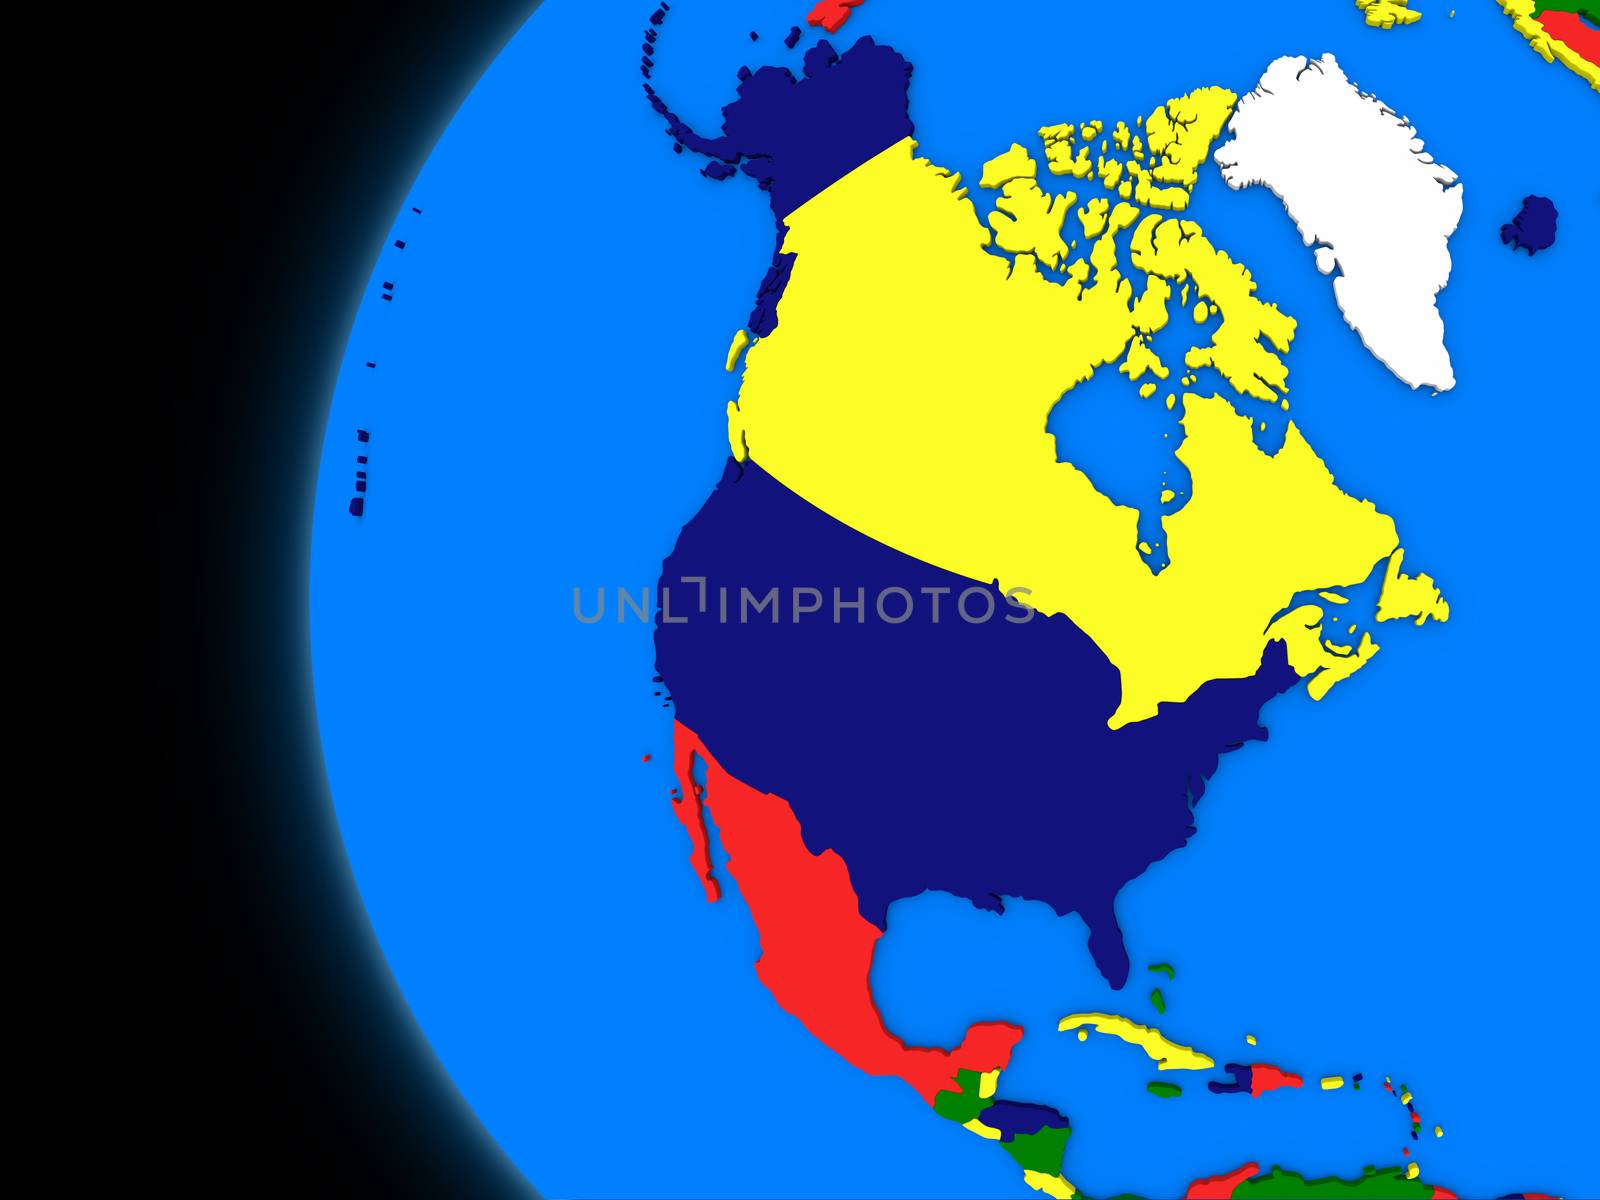 north american continent on political Earth by Harvepino